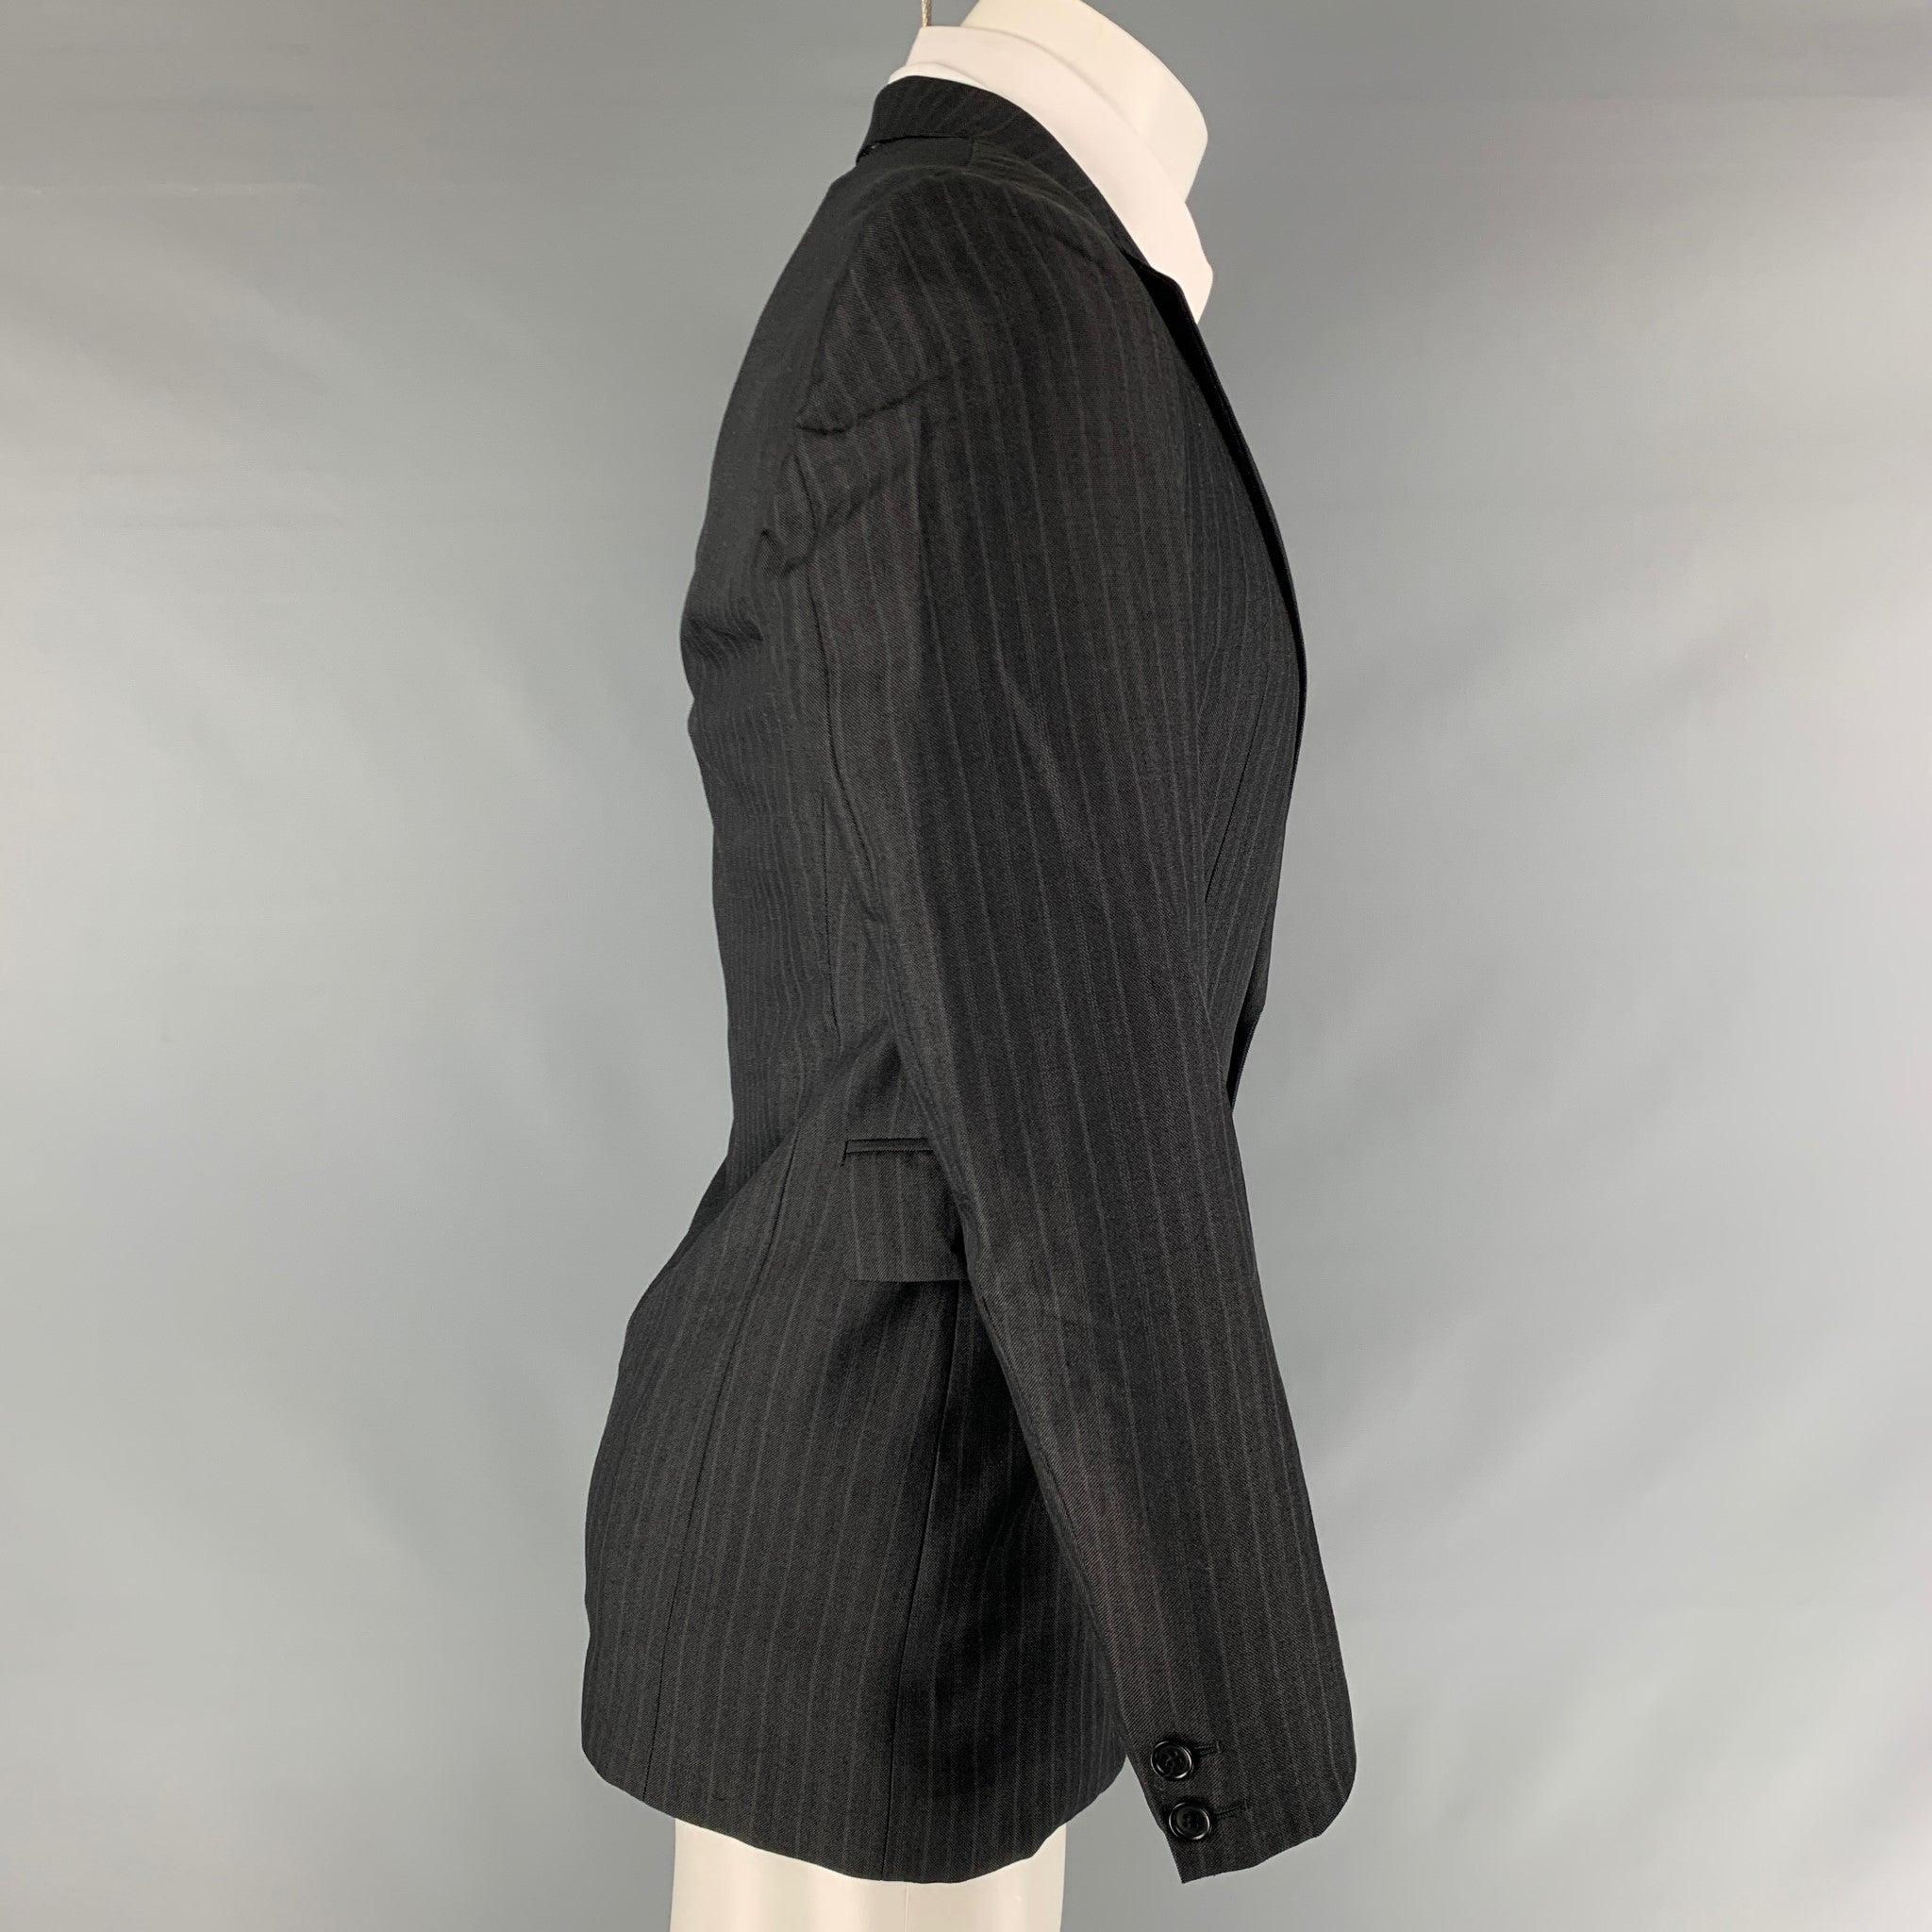 CoSTUME NATIONAL sport coat comes in a black stripped wool blend woven material featuring a notch lapel, flap pockets, and a double button closure. Made in Italy.Excellent Pre- Owned Material. 

Marked:   38 

Measurements: 
 
Shoulder: 16.5 inches